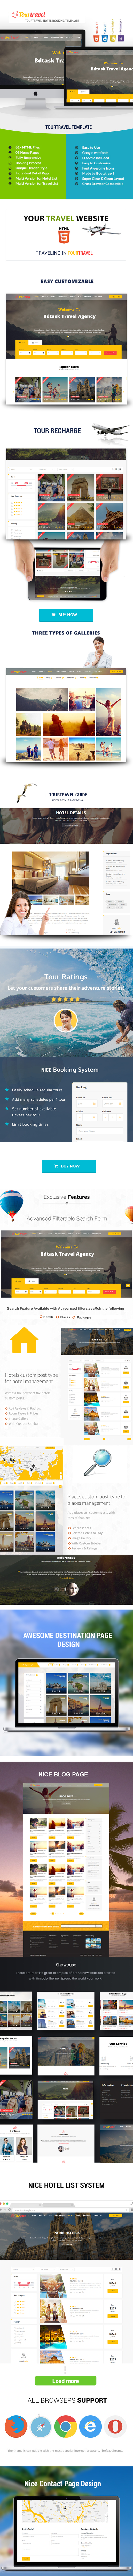 Travel Tour - Tour Travel Hotel Booking HTML Template - 2